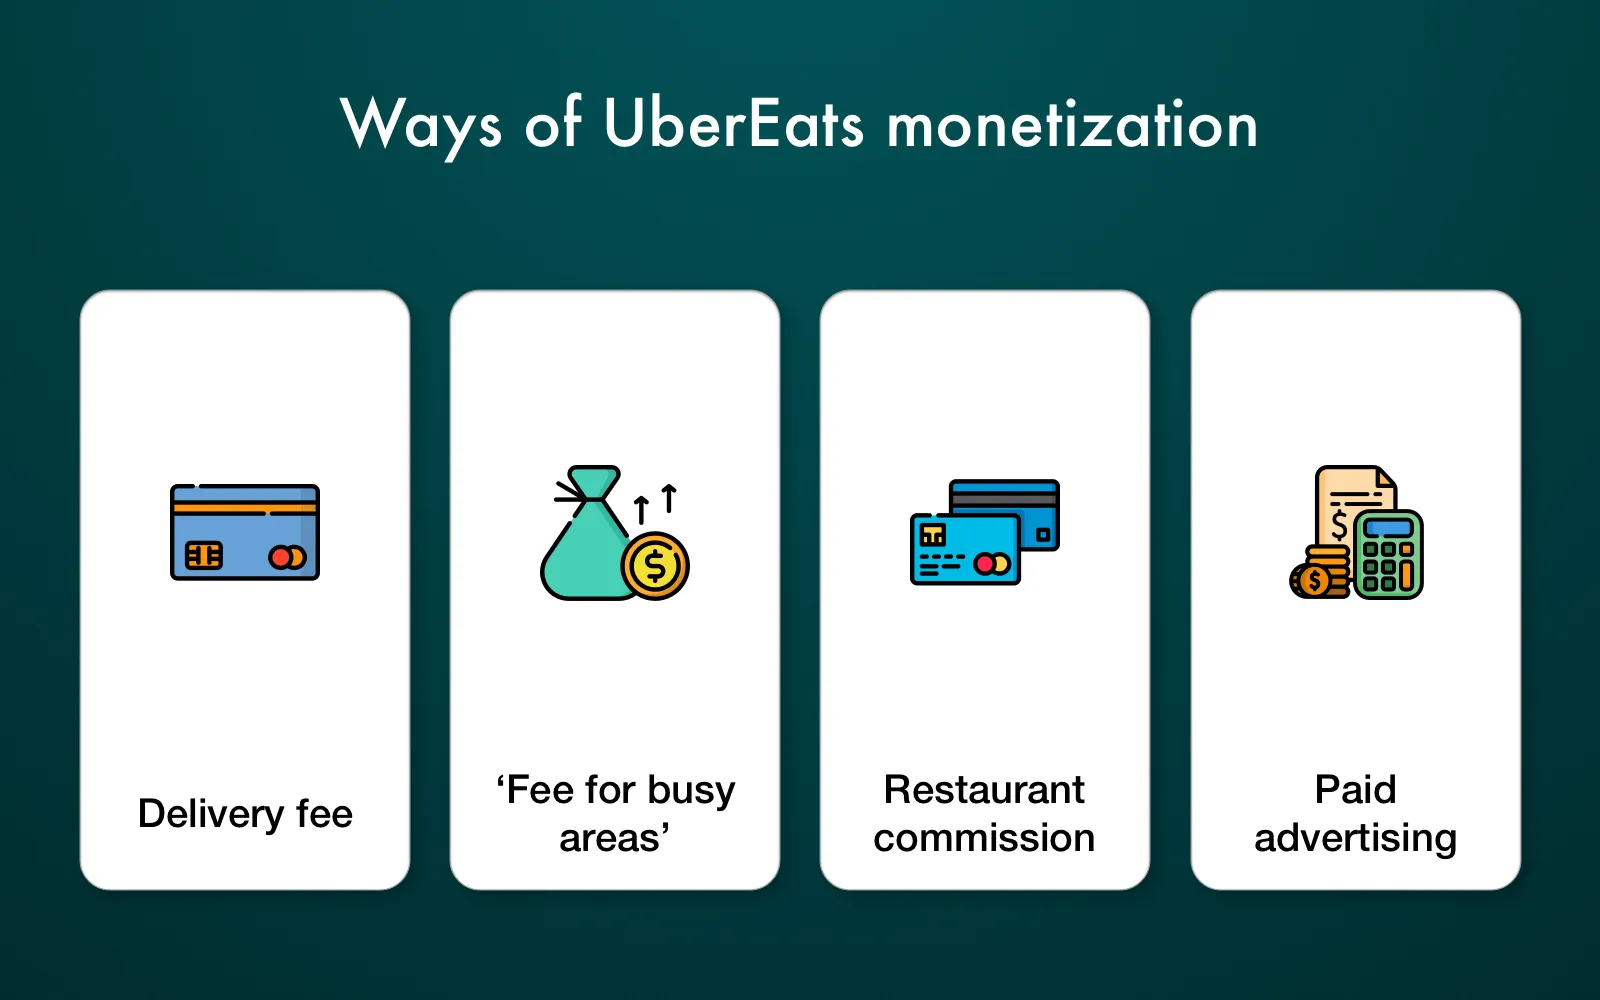 How UberEats monetize their services